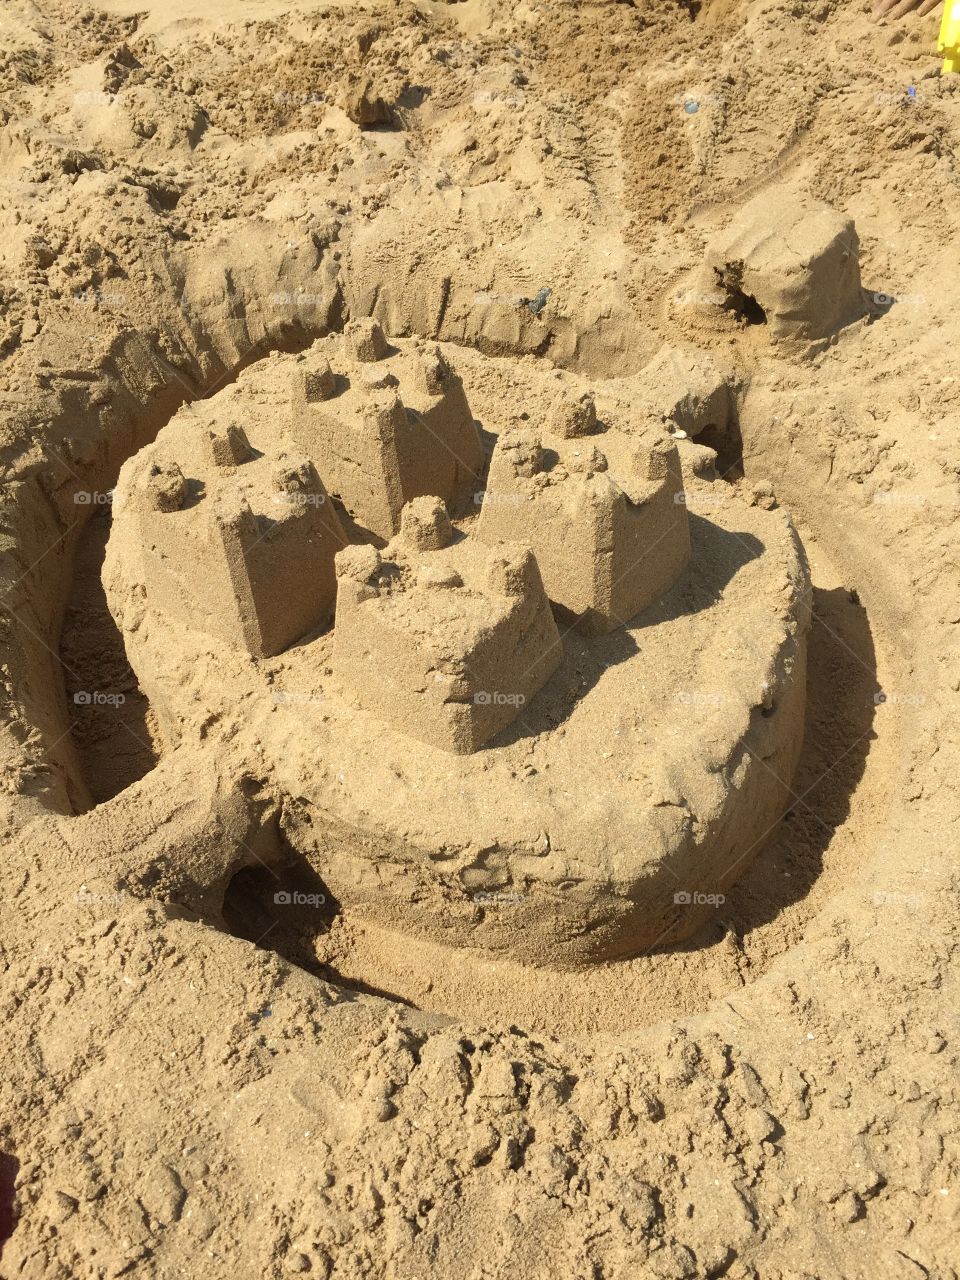 Castle . Day at the beach on a hot day with family and made my very first sand castle! So proud! 